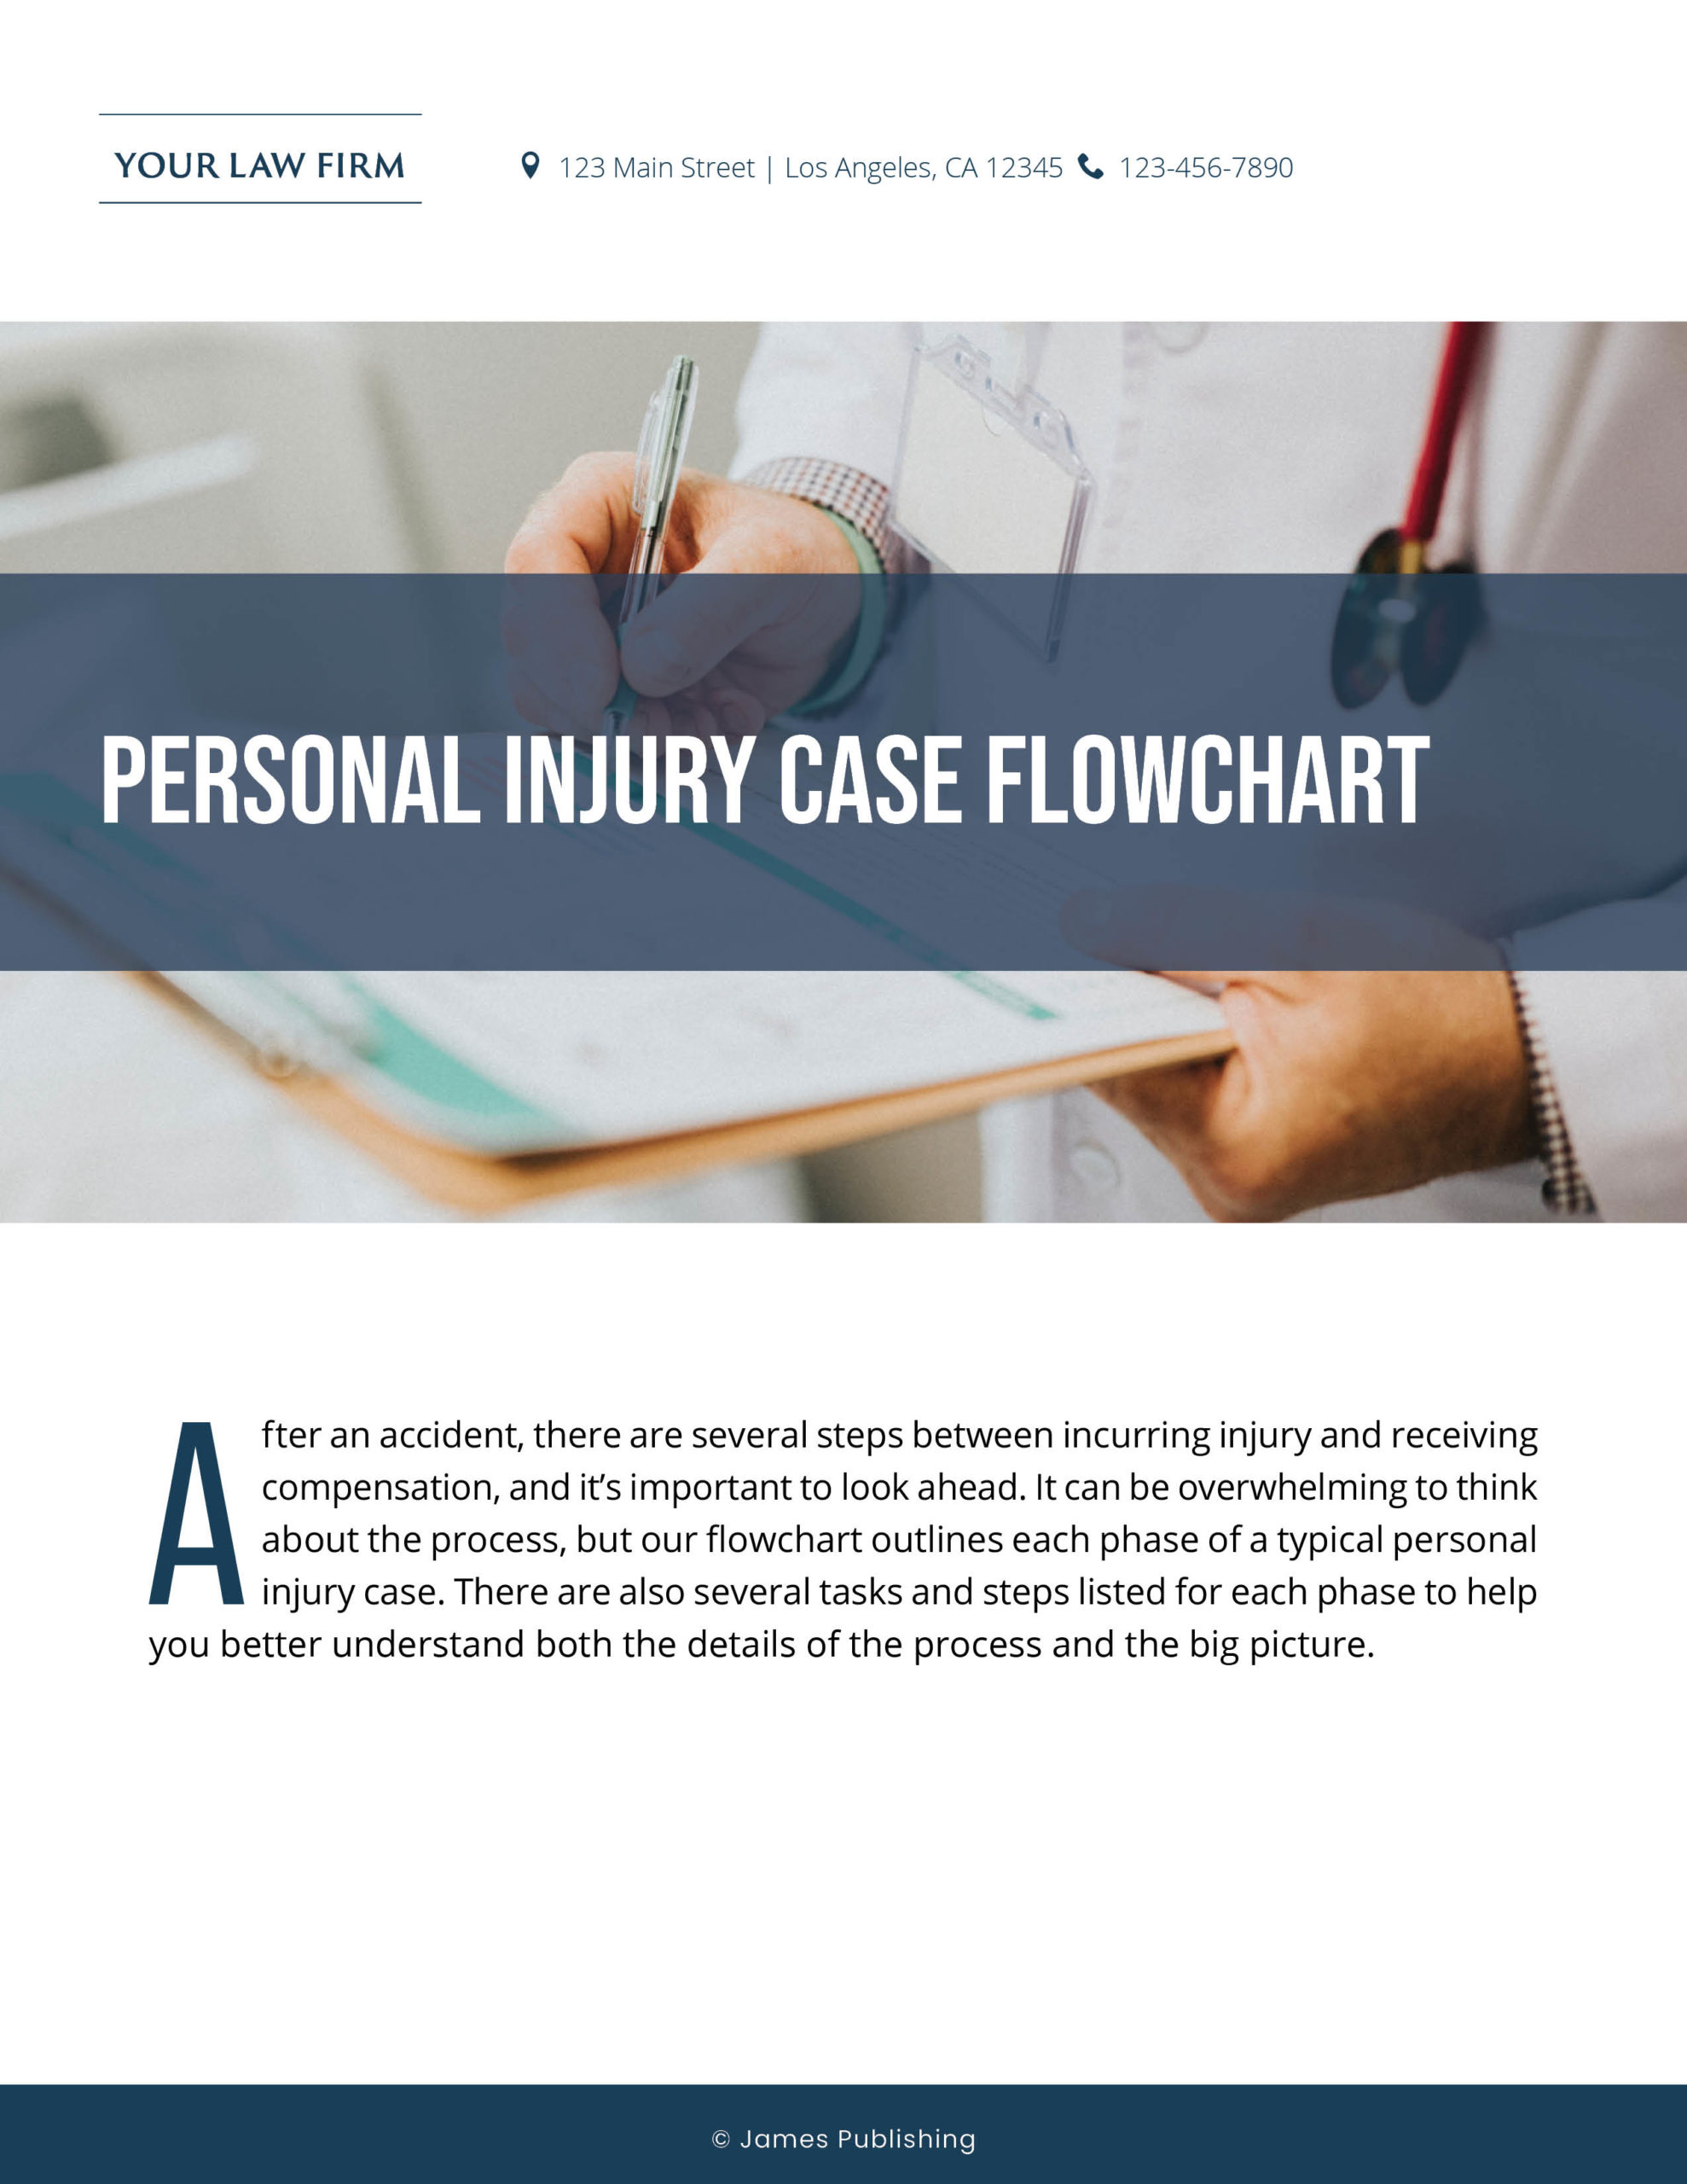 PI-17 Flowchart of a Personal Injury Case